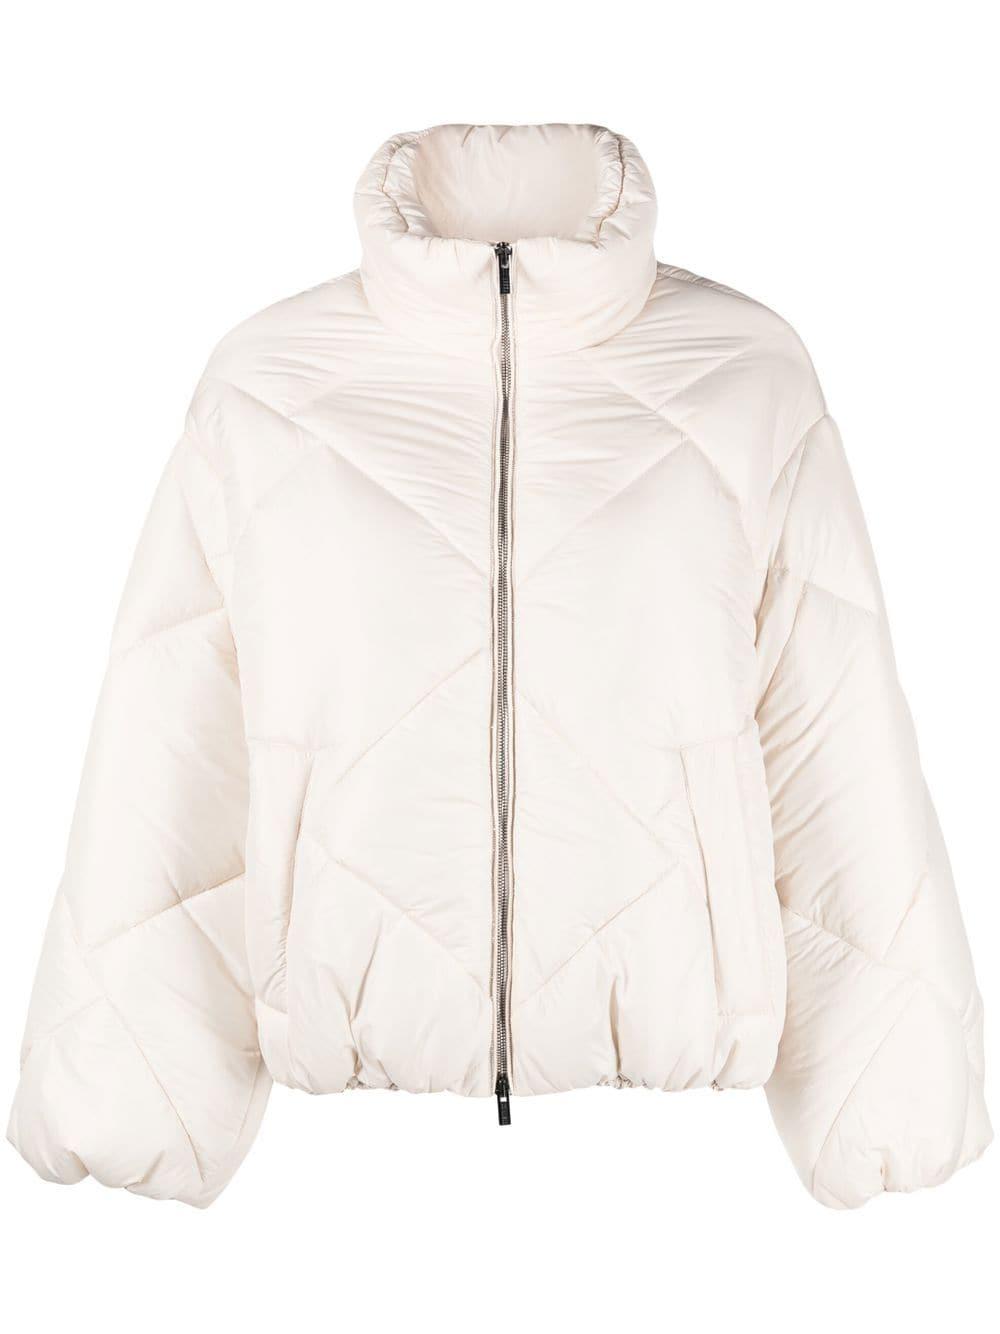 Peserico Diamond-quilted Puffer Jacket in Natural | Lyst